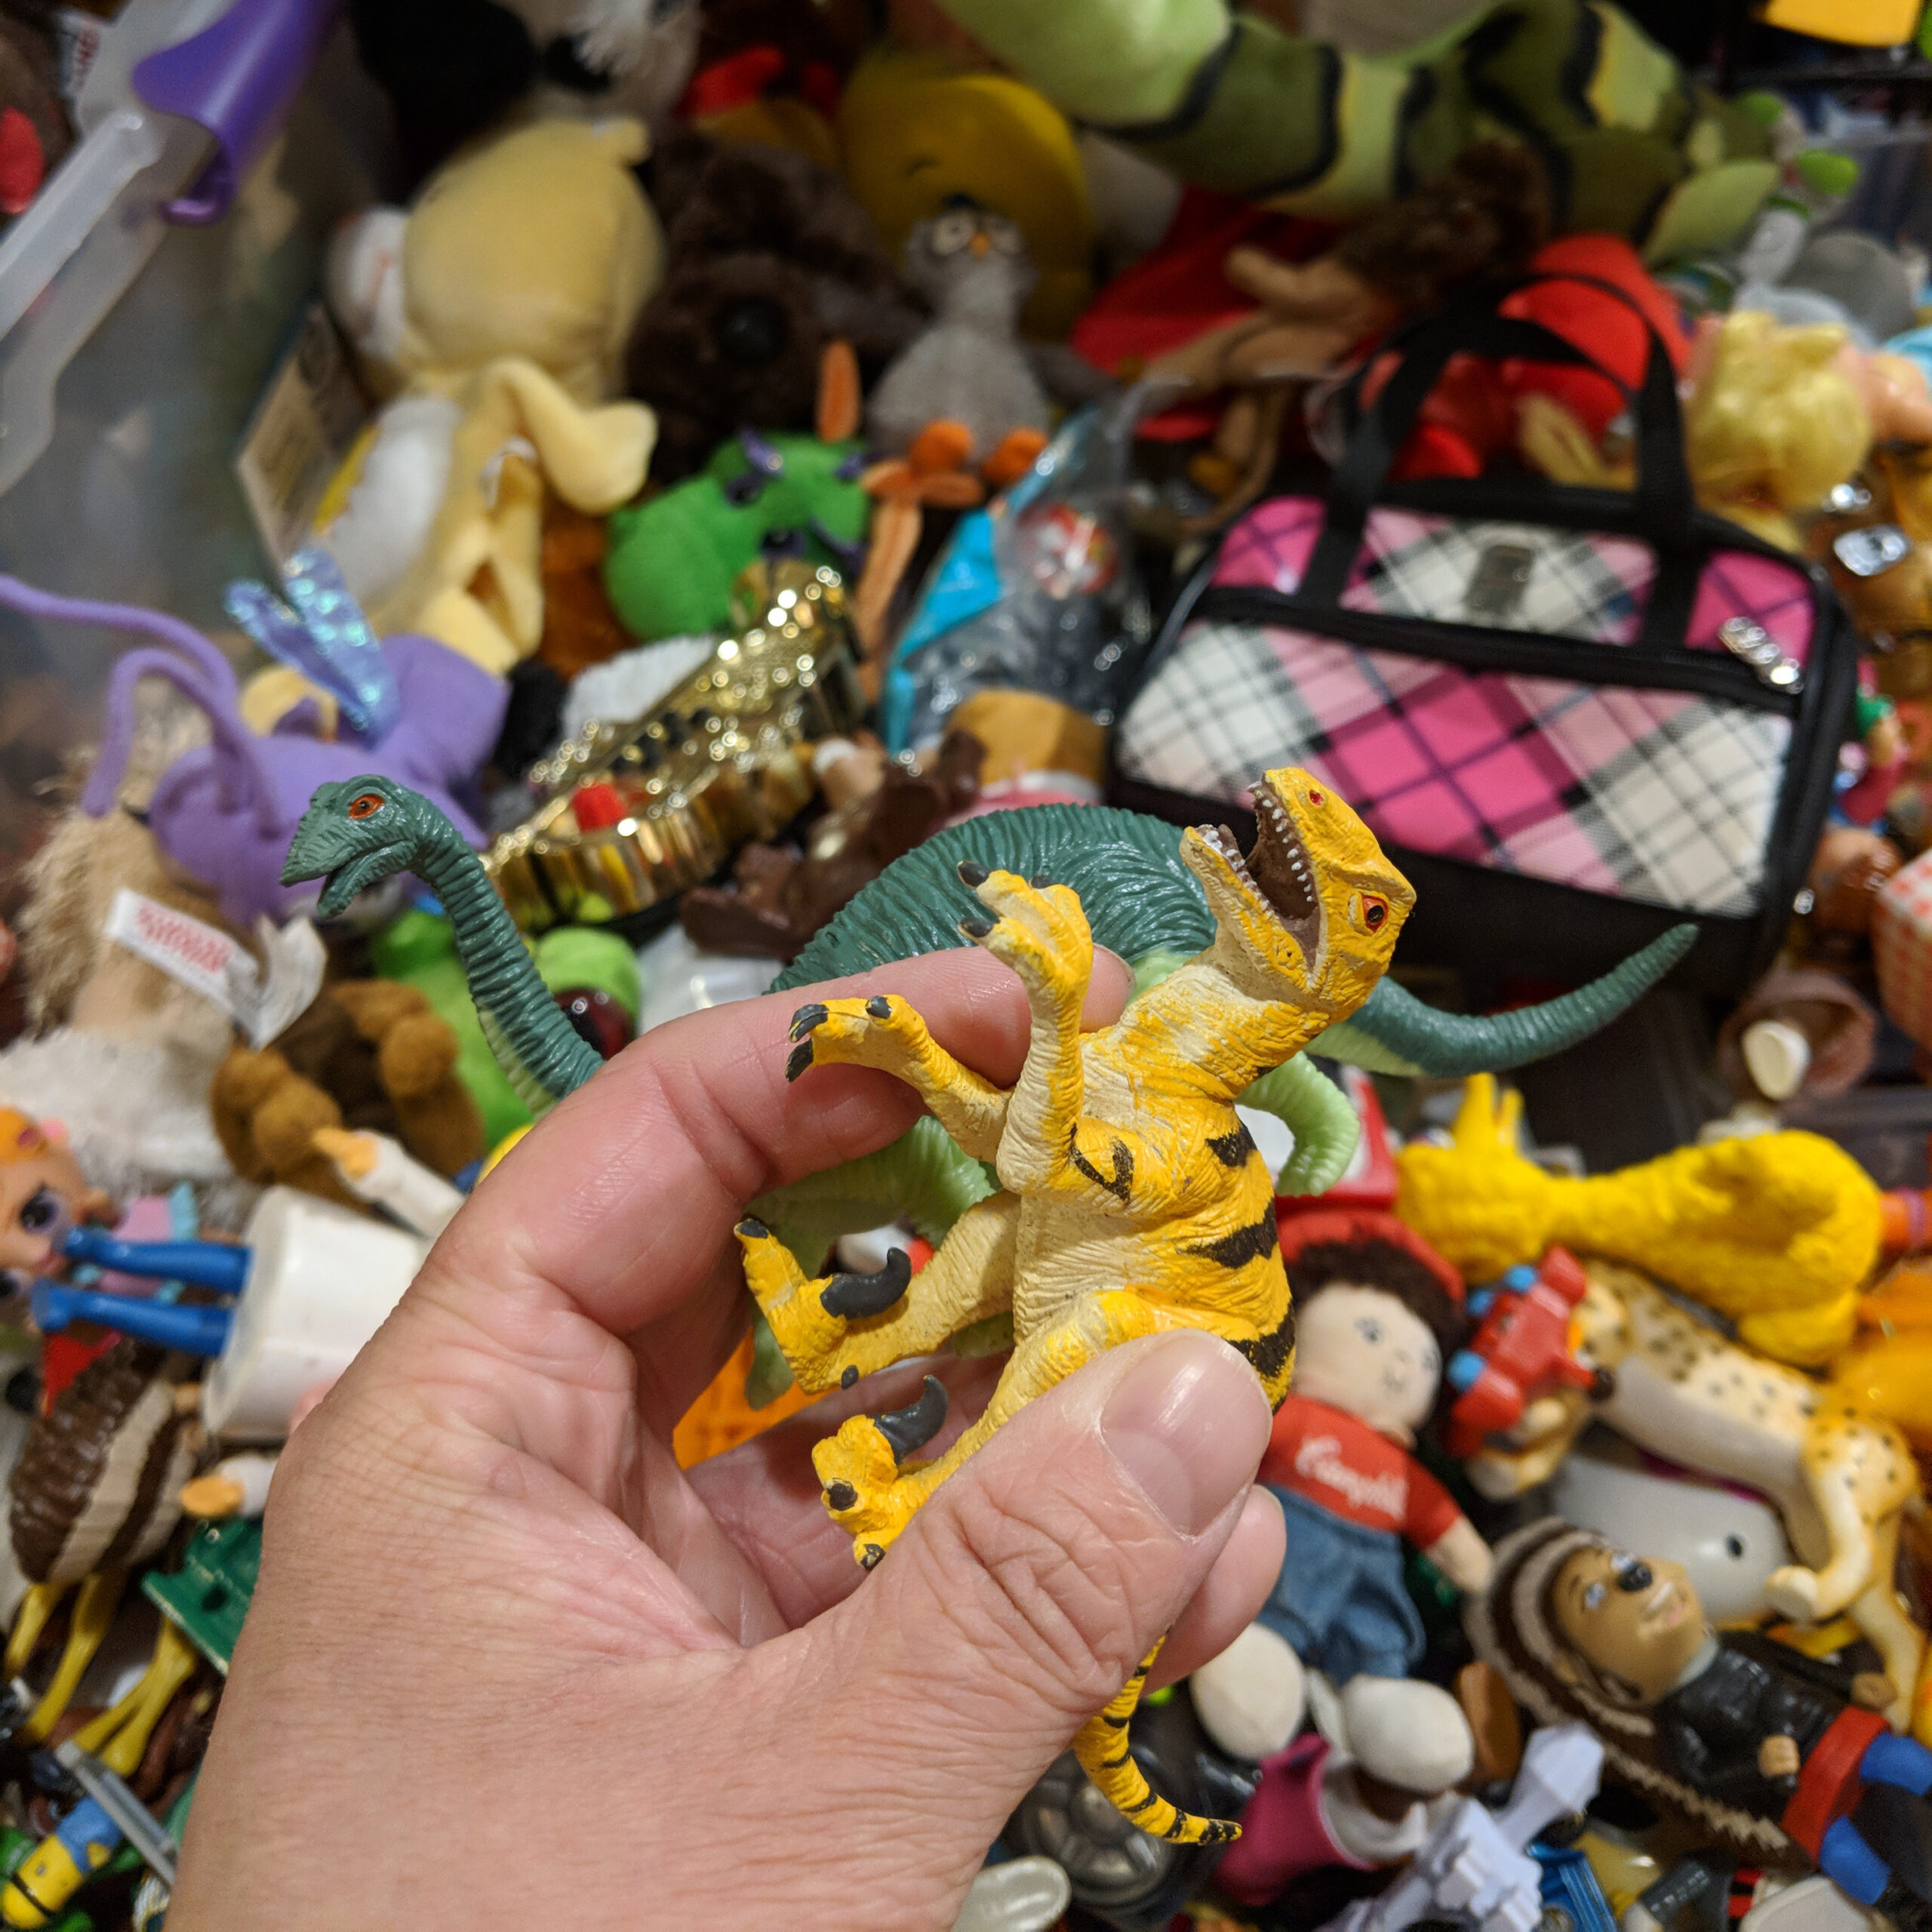 sorting through toys in a thrift store bin